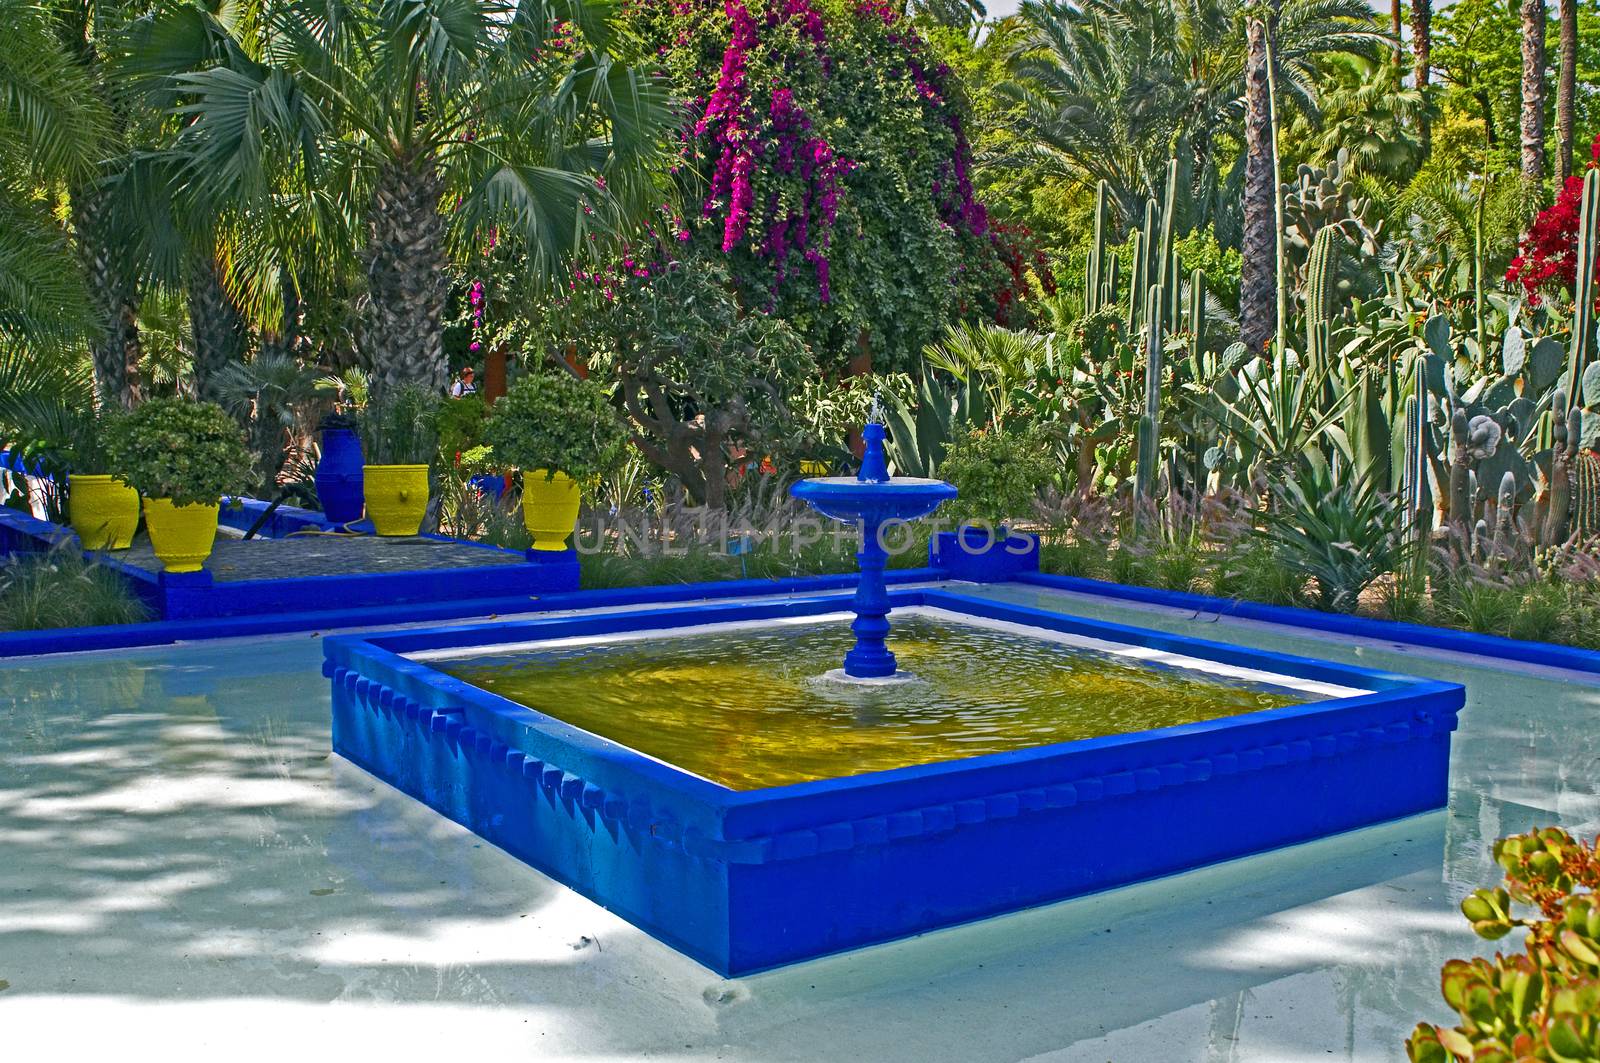 The view of the ornamental pool at the Jardin Majorelle in Marrakech with colourful pottery containers,  palms, cactus, succulents and Bougainvillea